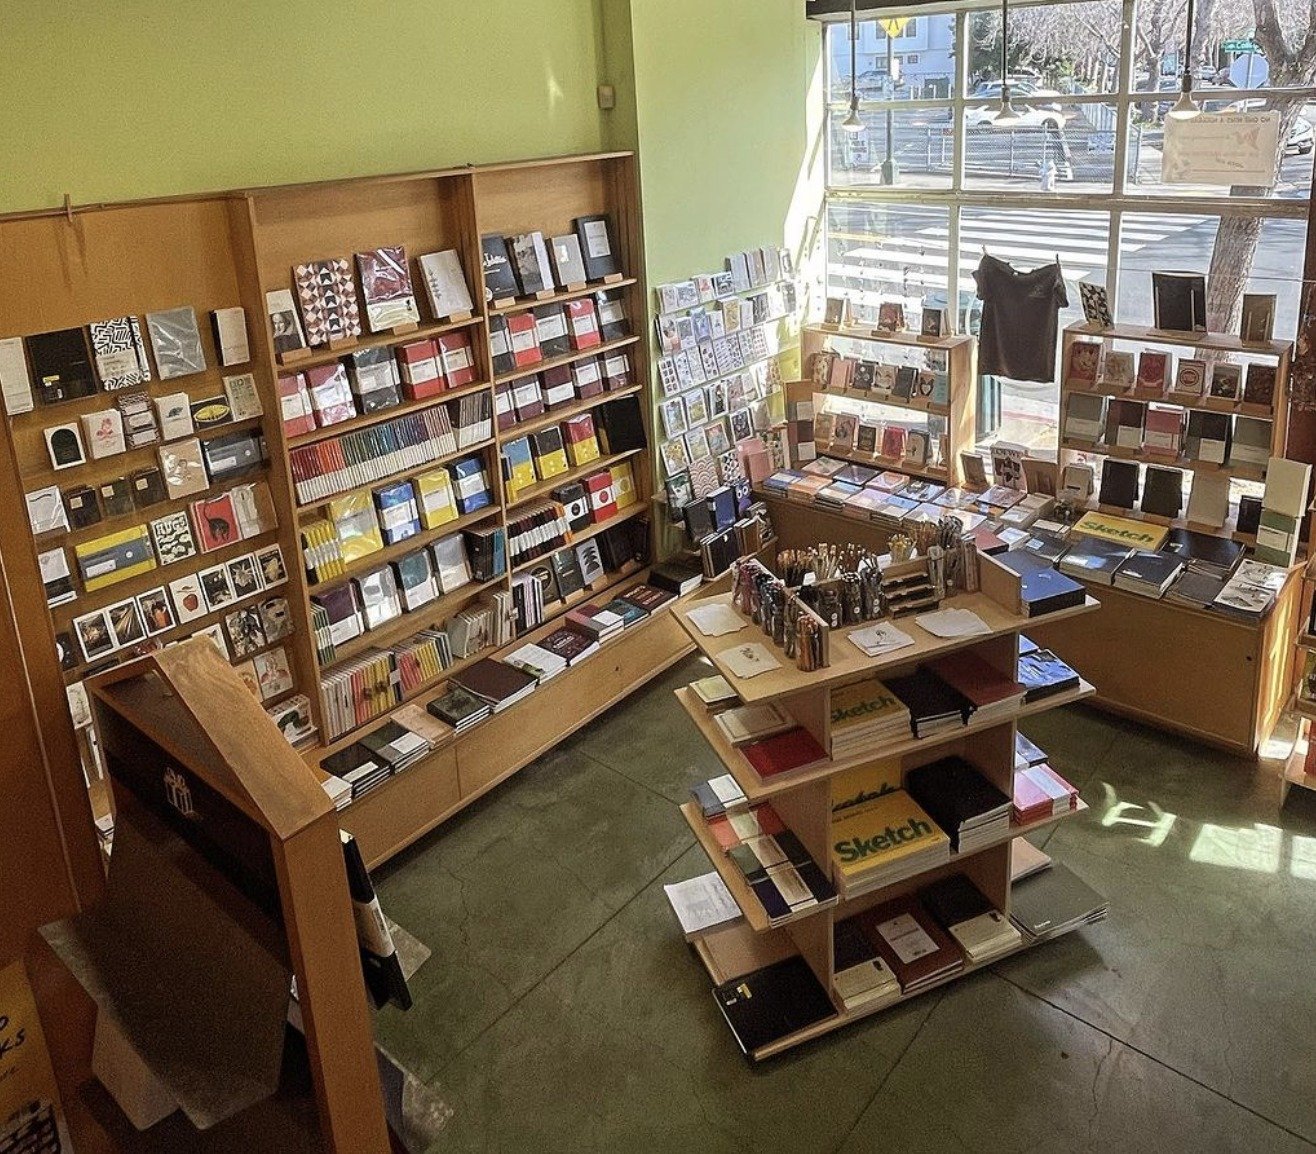 Looking for a great book? Order through your local, independent bookseller! Or get a recommendation by the staff. 

This store also offers an amazing selection of cards, stationary, and gifts!

East Bay Booksellers
5433 College Ave.
(510) 653-9965
ww